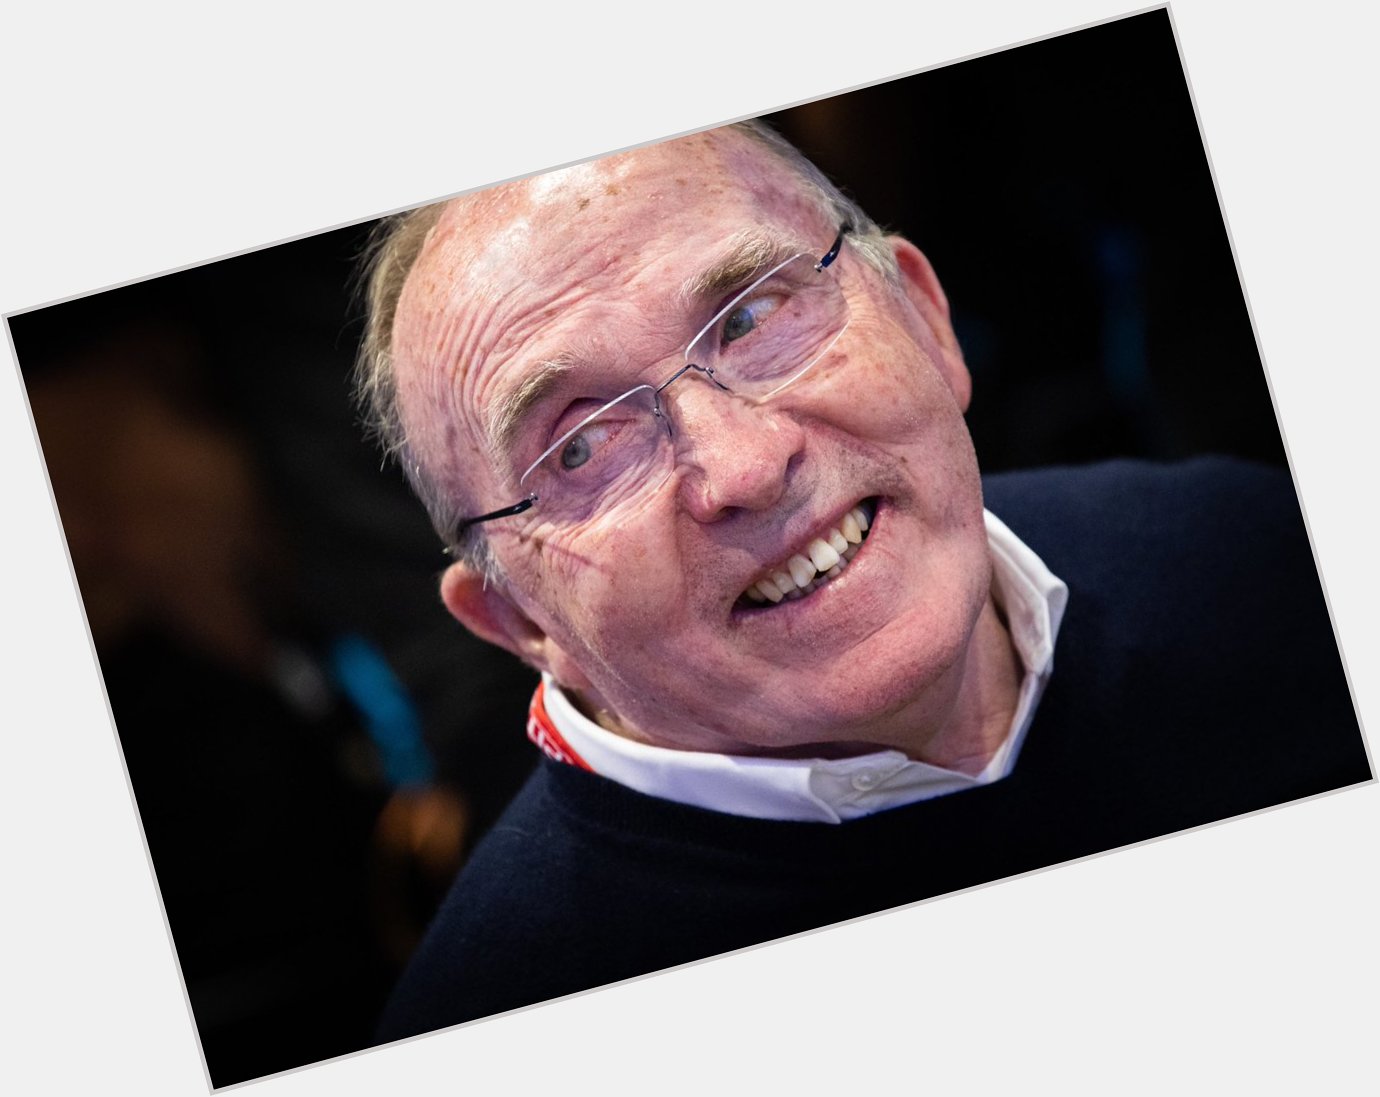  Happy birthday to Sir Frank Williams who turns 79 today!  